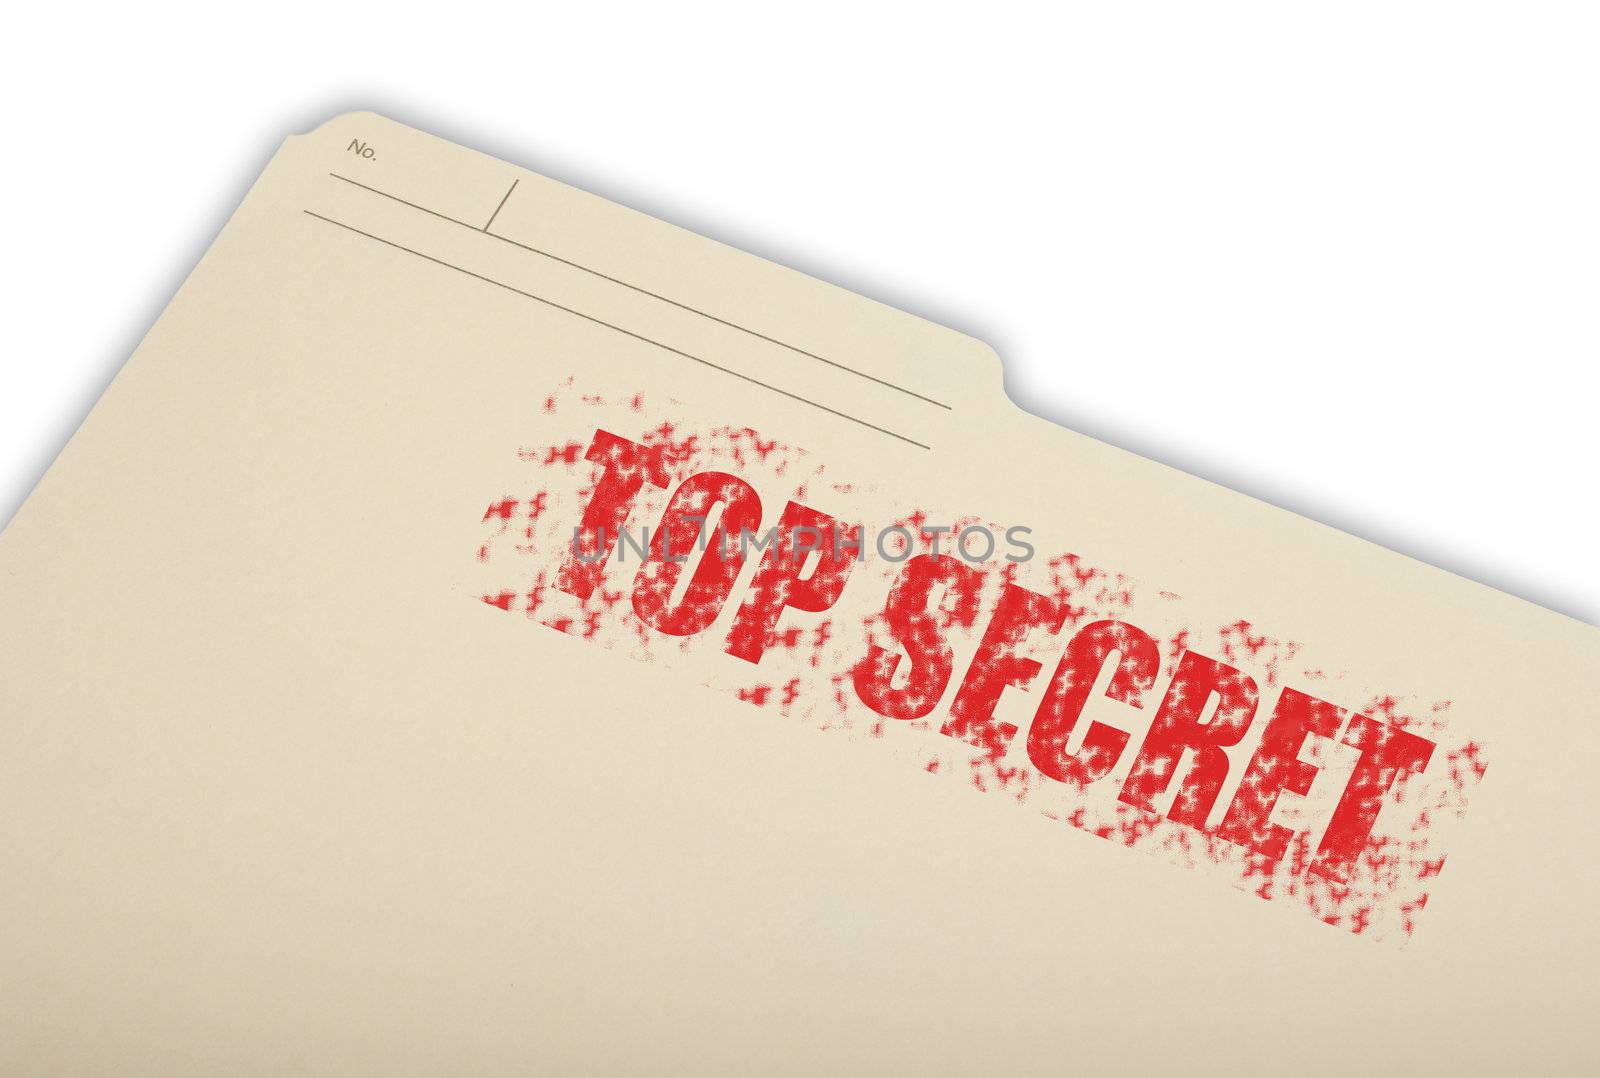 A top secret folder isolated on a white background.